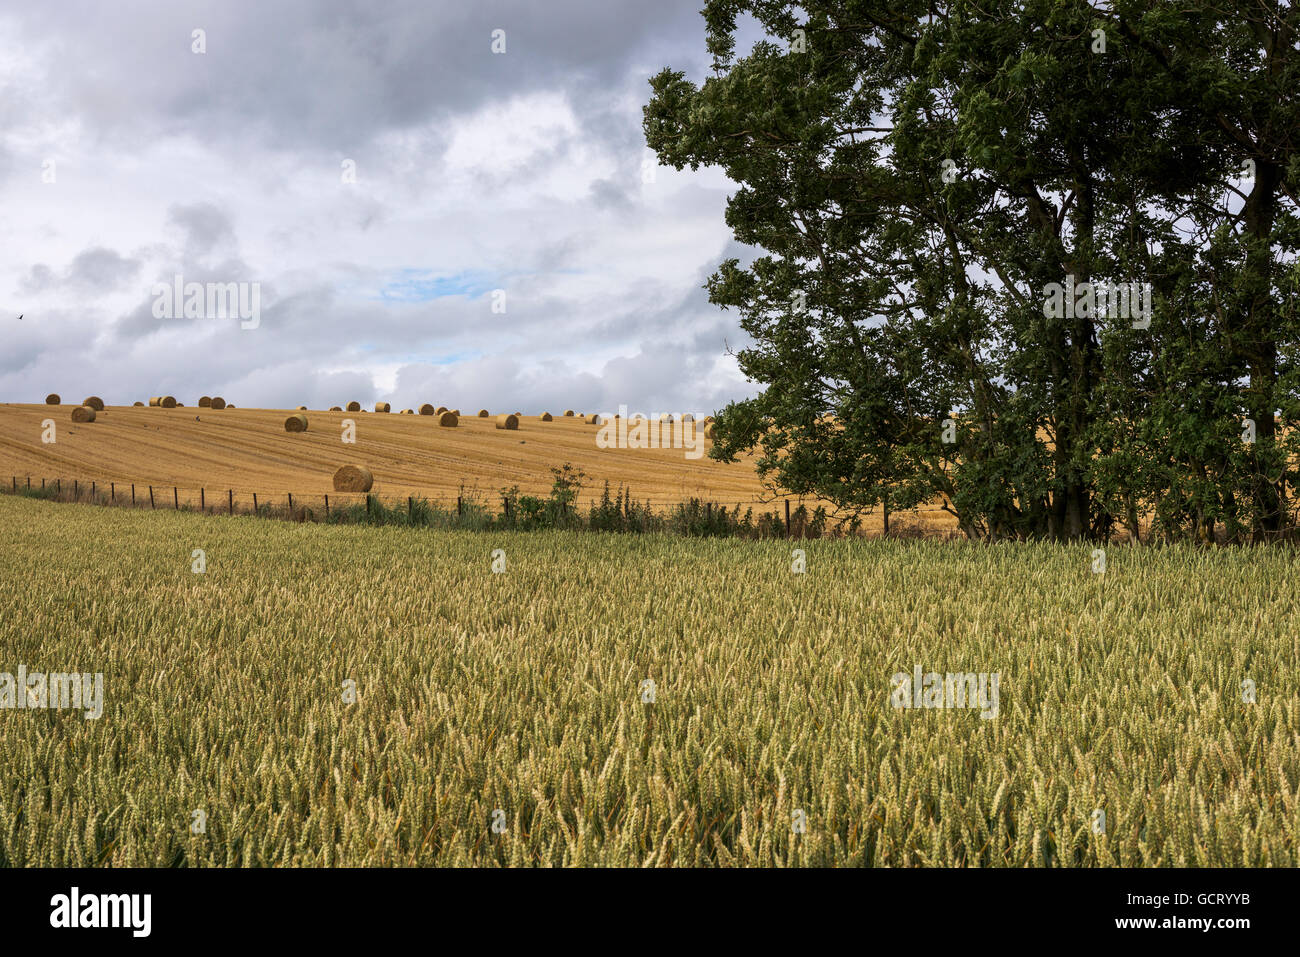 Crop in a field in the foreground and a golden harvest field with hay bales in the background; Cupar, Scotland Stock Photo